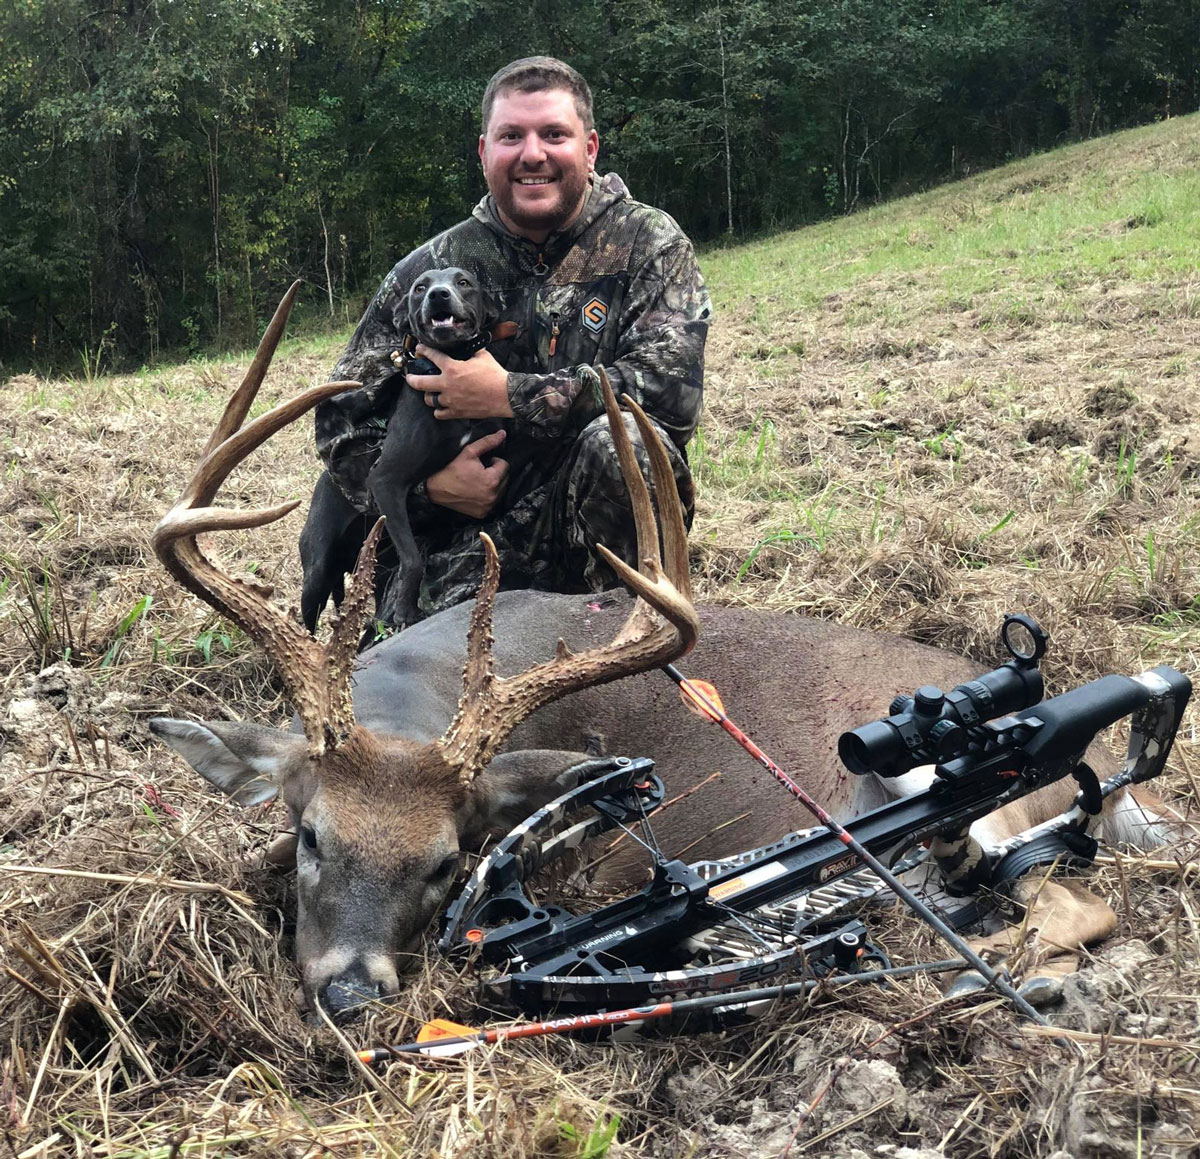 Dustin Clouatre killed this 10-point buck at his Mount Pleasant hunting club in East Baton Rouge Parish.